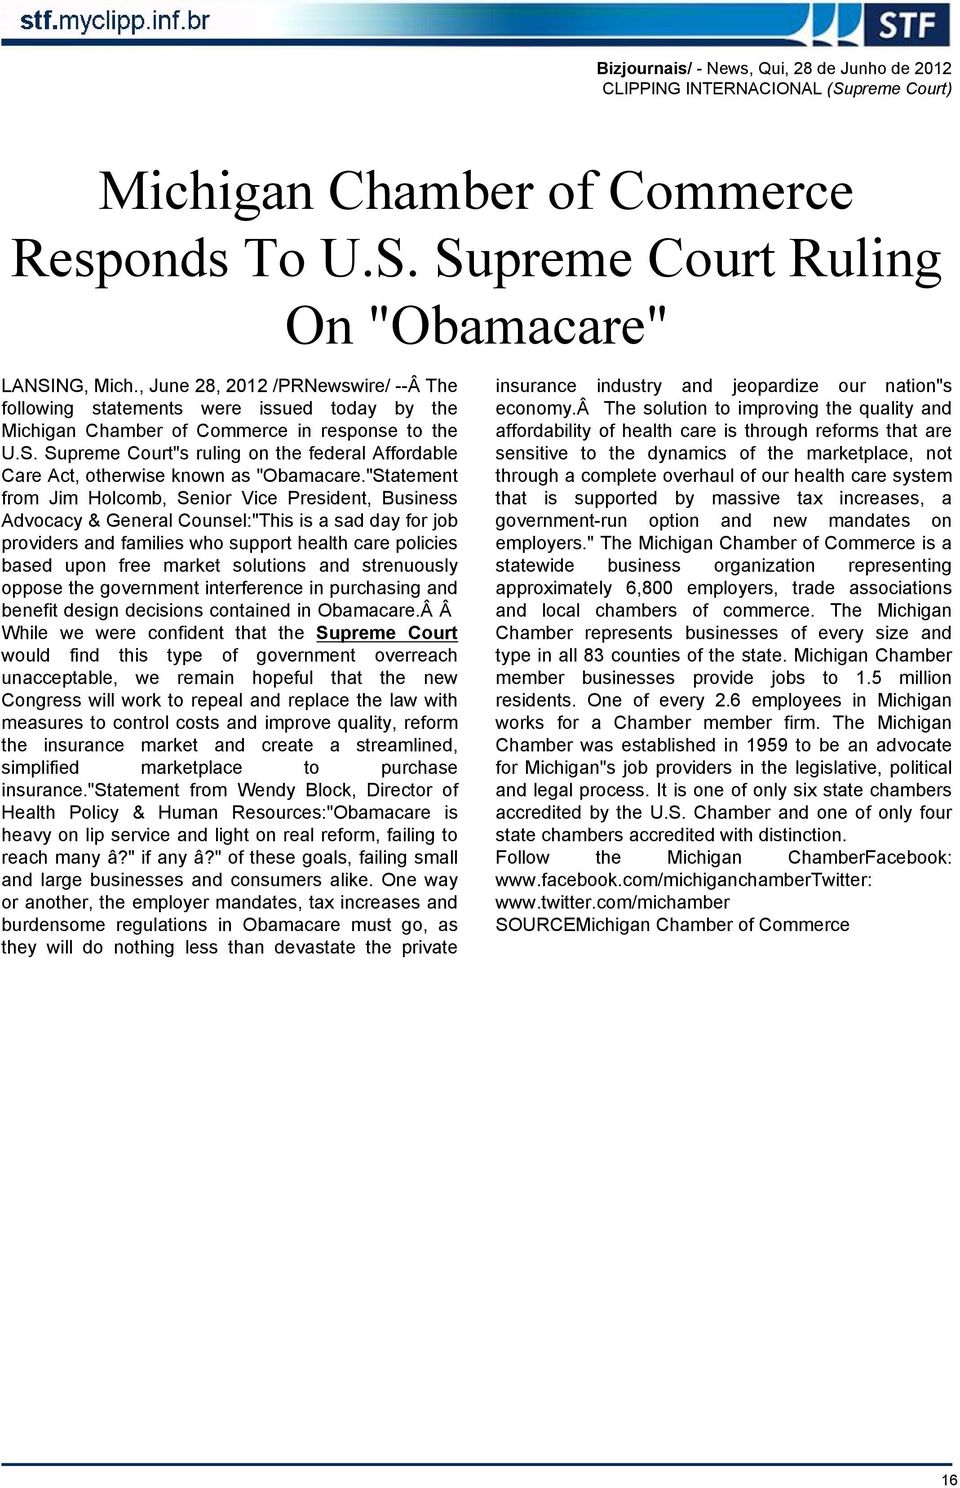 Supreme Court"s ruling on the federal Affordable Care Act, otherwise known as "Obamacare.